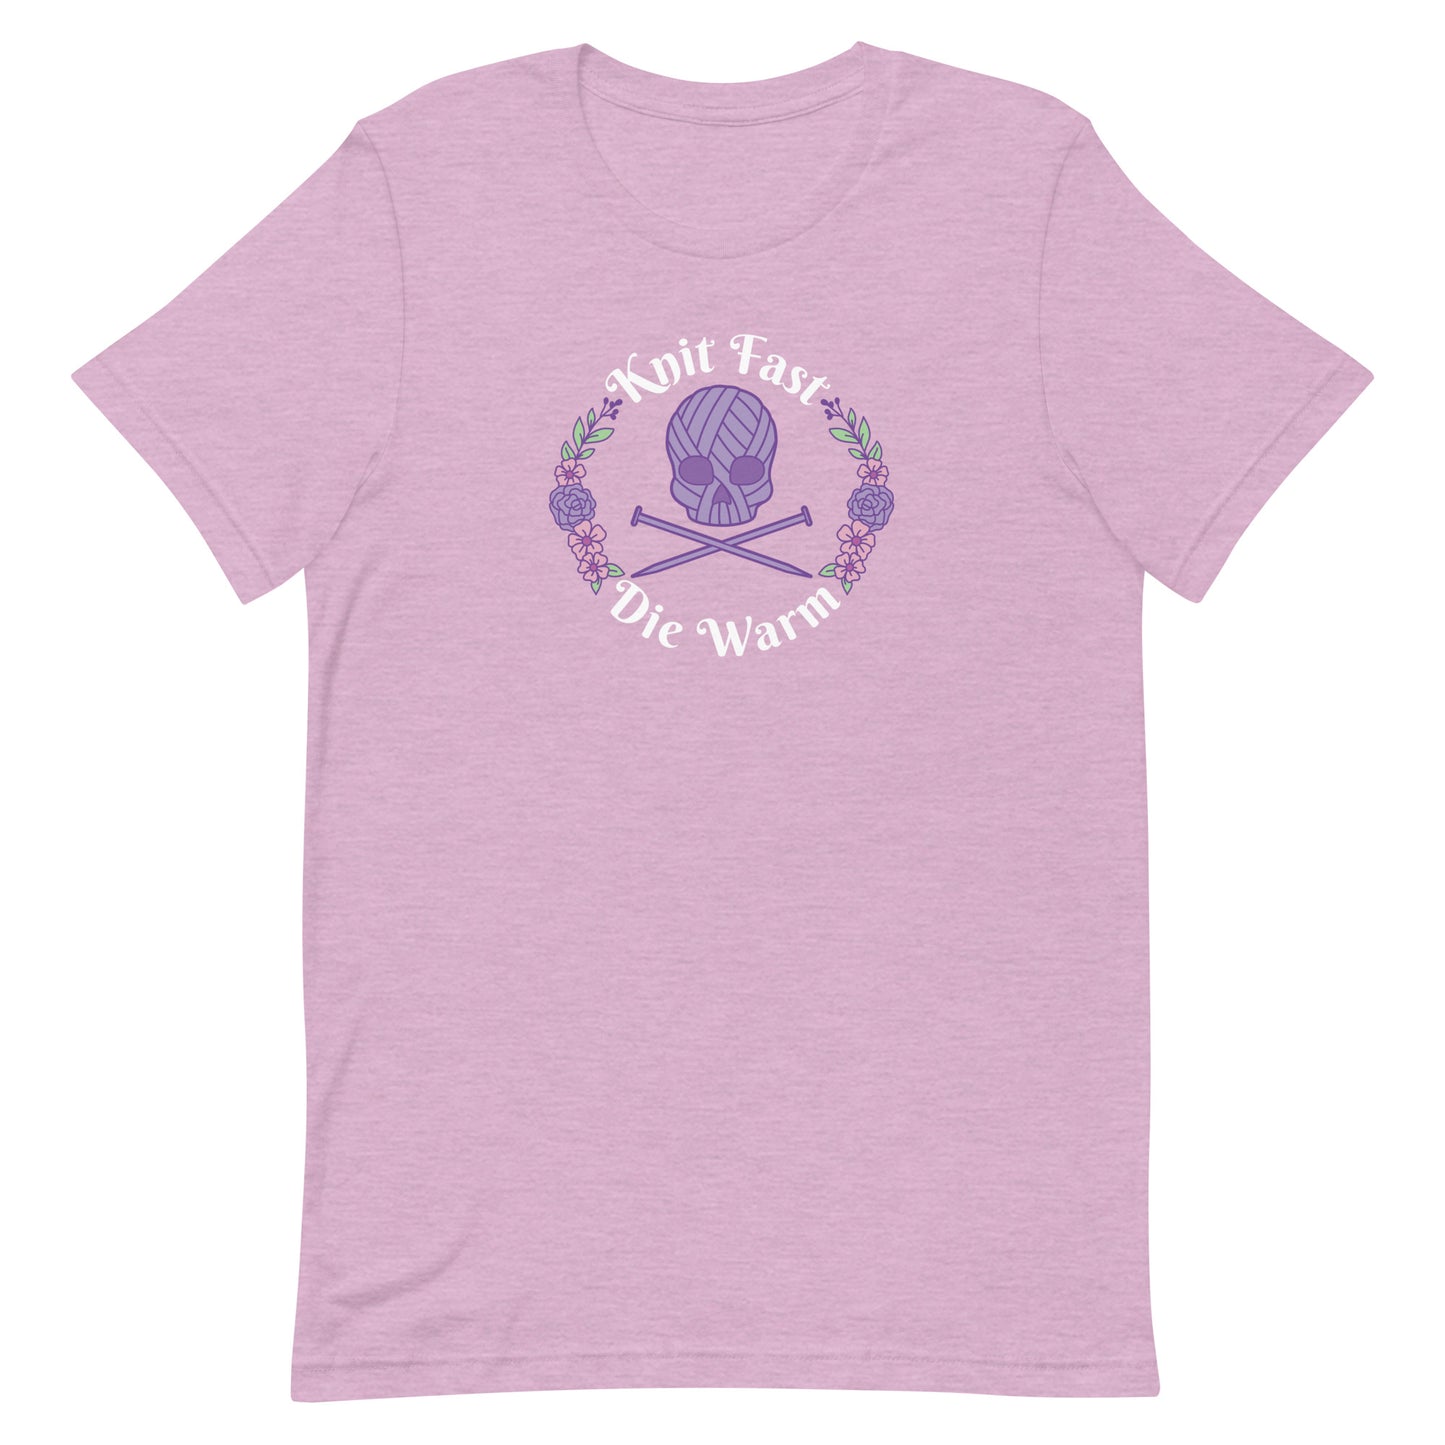 A heathered pink crewneck t-shirt featuring an image of a skull and crossbones made of yarn and knitting needles. A floral wreath surrounds the skull, along with words that read "Knit Fast, Die Warm"